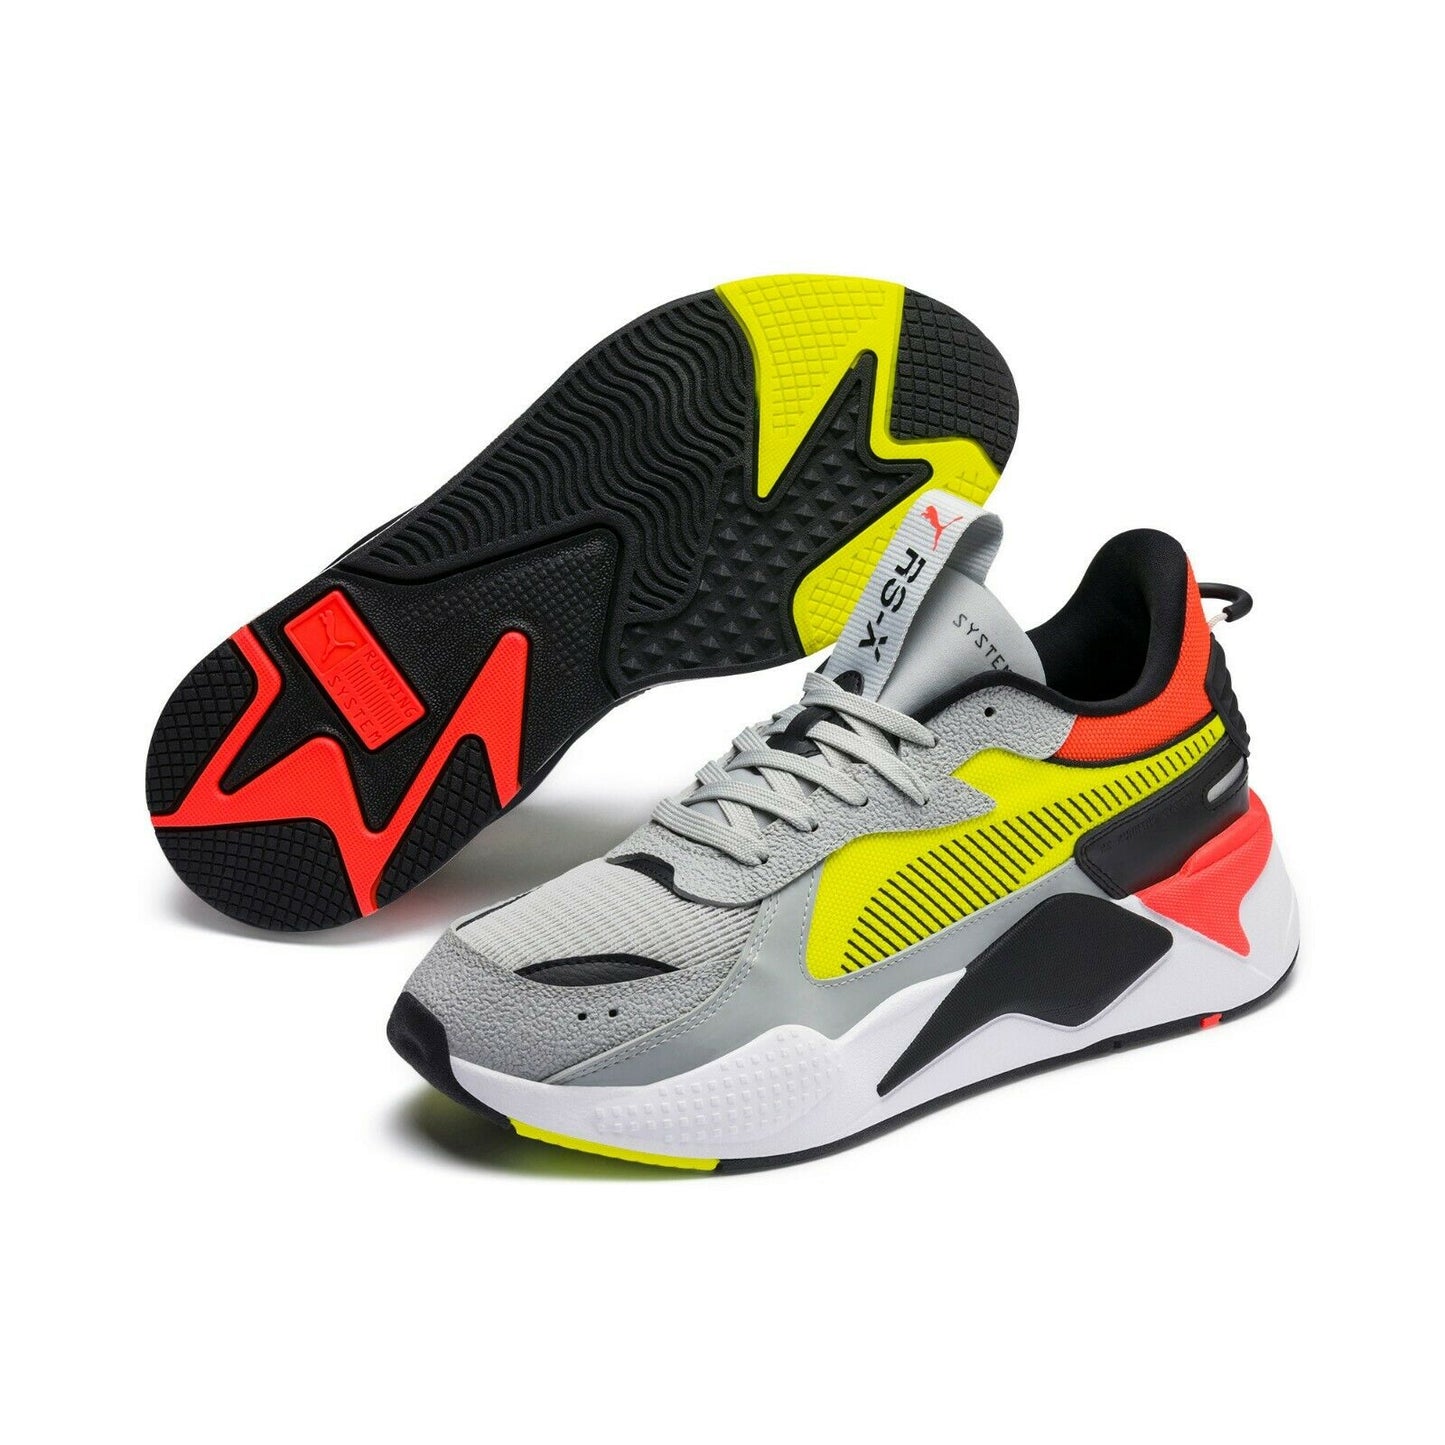 RS-X Hard Drive High Rise/Yellow Alert Sneakers Running Shoes -36981801